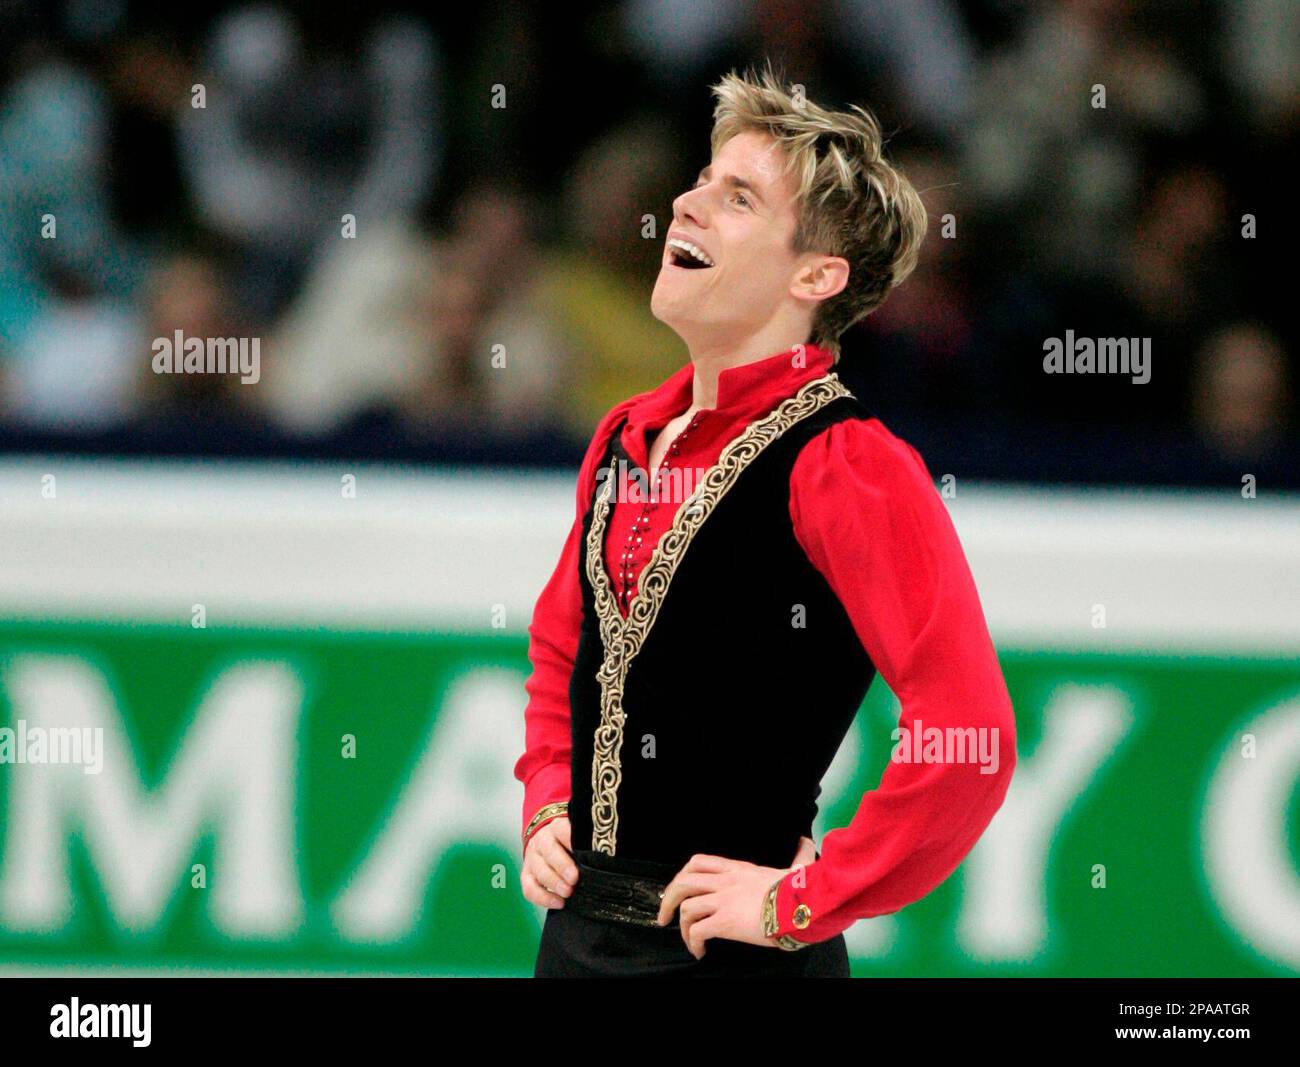 Canada's Jeffrey Buttle reacts after winning the gold medal after the men's free skating routine at the World Figure Skating Championships in Goteborg, Sweden, Saturday, March 22, 2008. (AP Photo/Ivan Sekretarev) Stock Photo